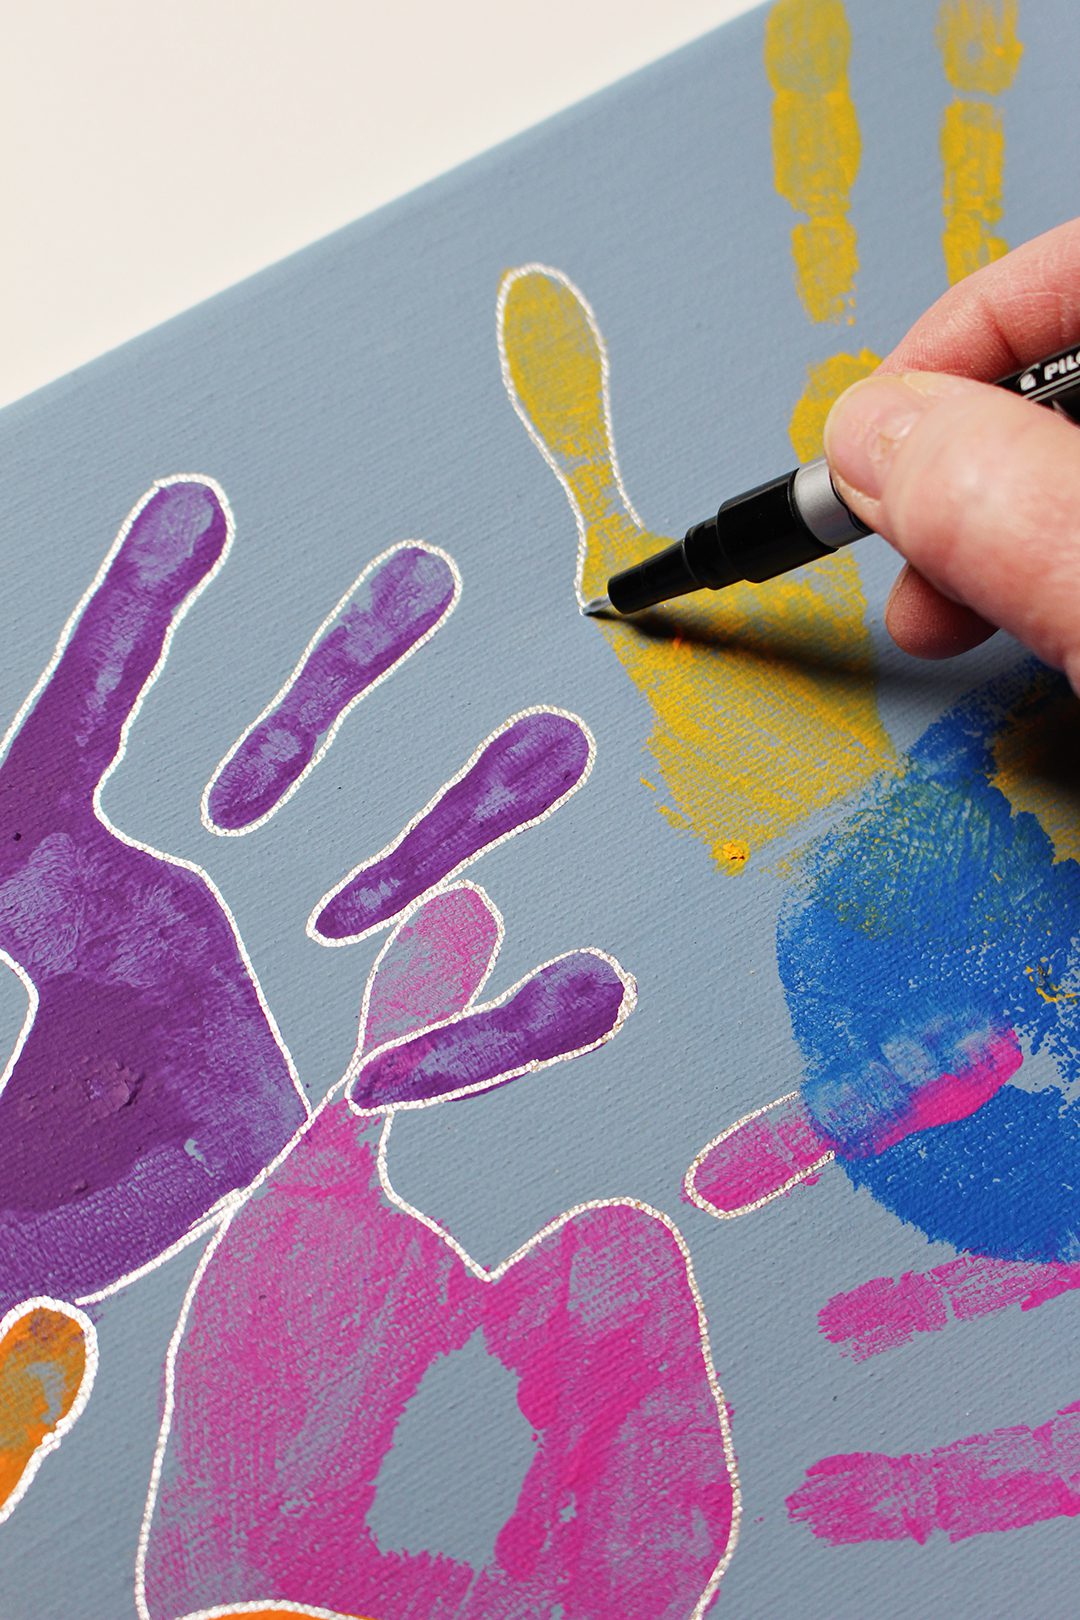 An outline being drawn around painted handprints on a canvas.